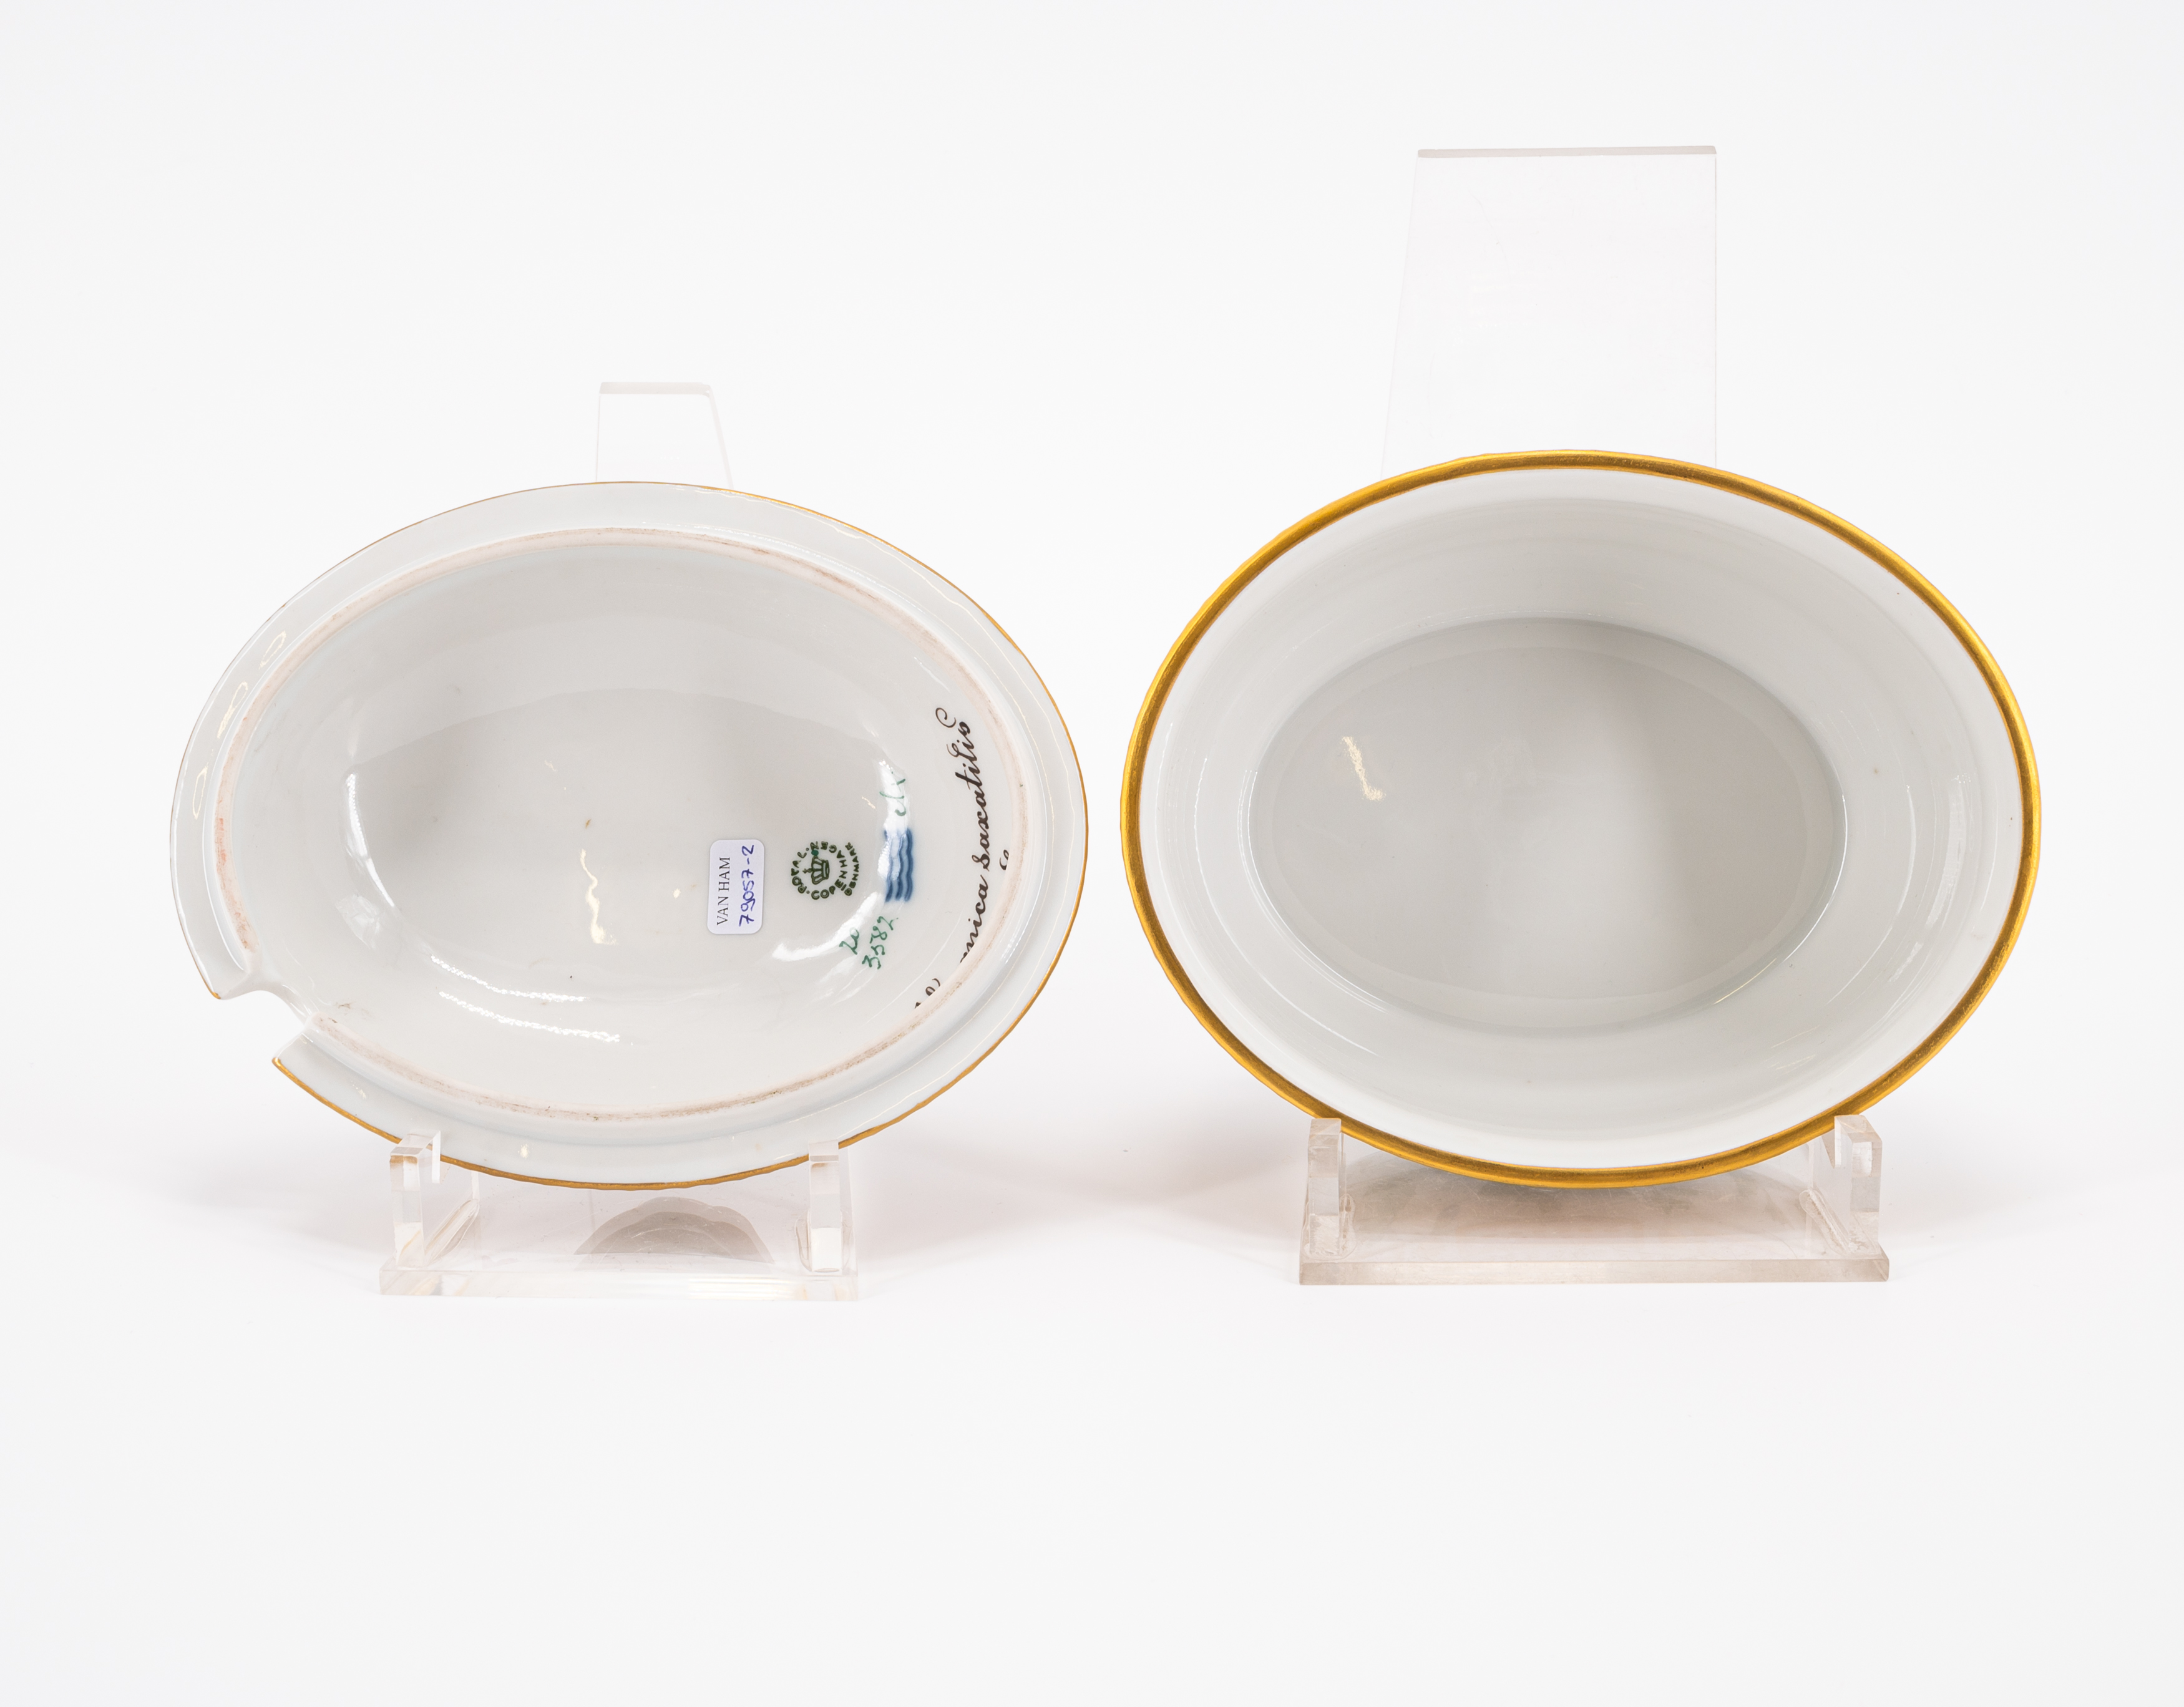 18 PIECES FROM A PORCELAIN DINNER SERVICE 'FLORA DANICA' - Image 26 of 26